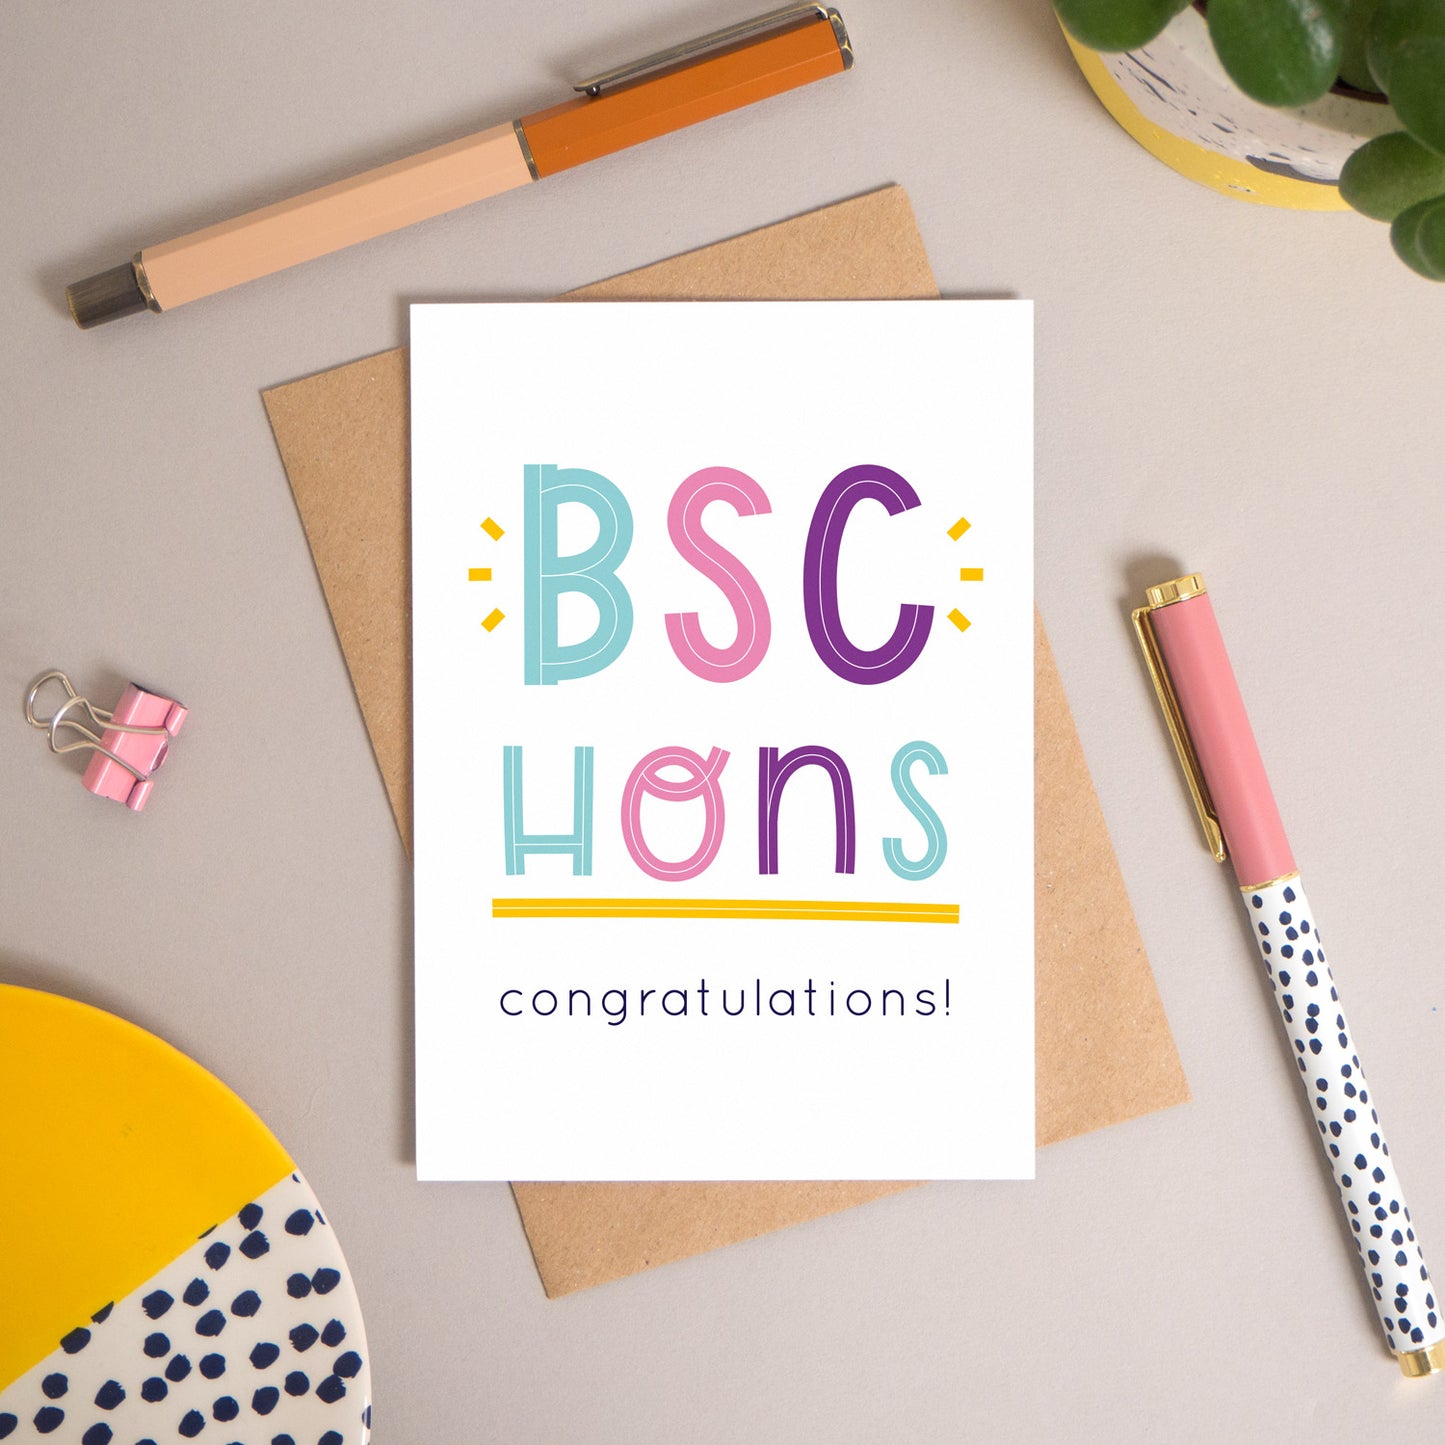 This BSc Hons graduation congratulations card has been shot flatlay style looking directly over the top of the card. It is lying flat on it’s kraft brown envelope, on a warm grey background. Surrounding the card are pens, a clip, a plant and a trinket dish. This version of the card is in varying tones of navy and pink, purple and blue.